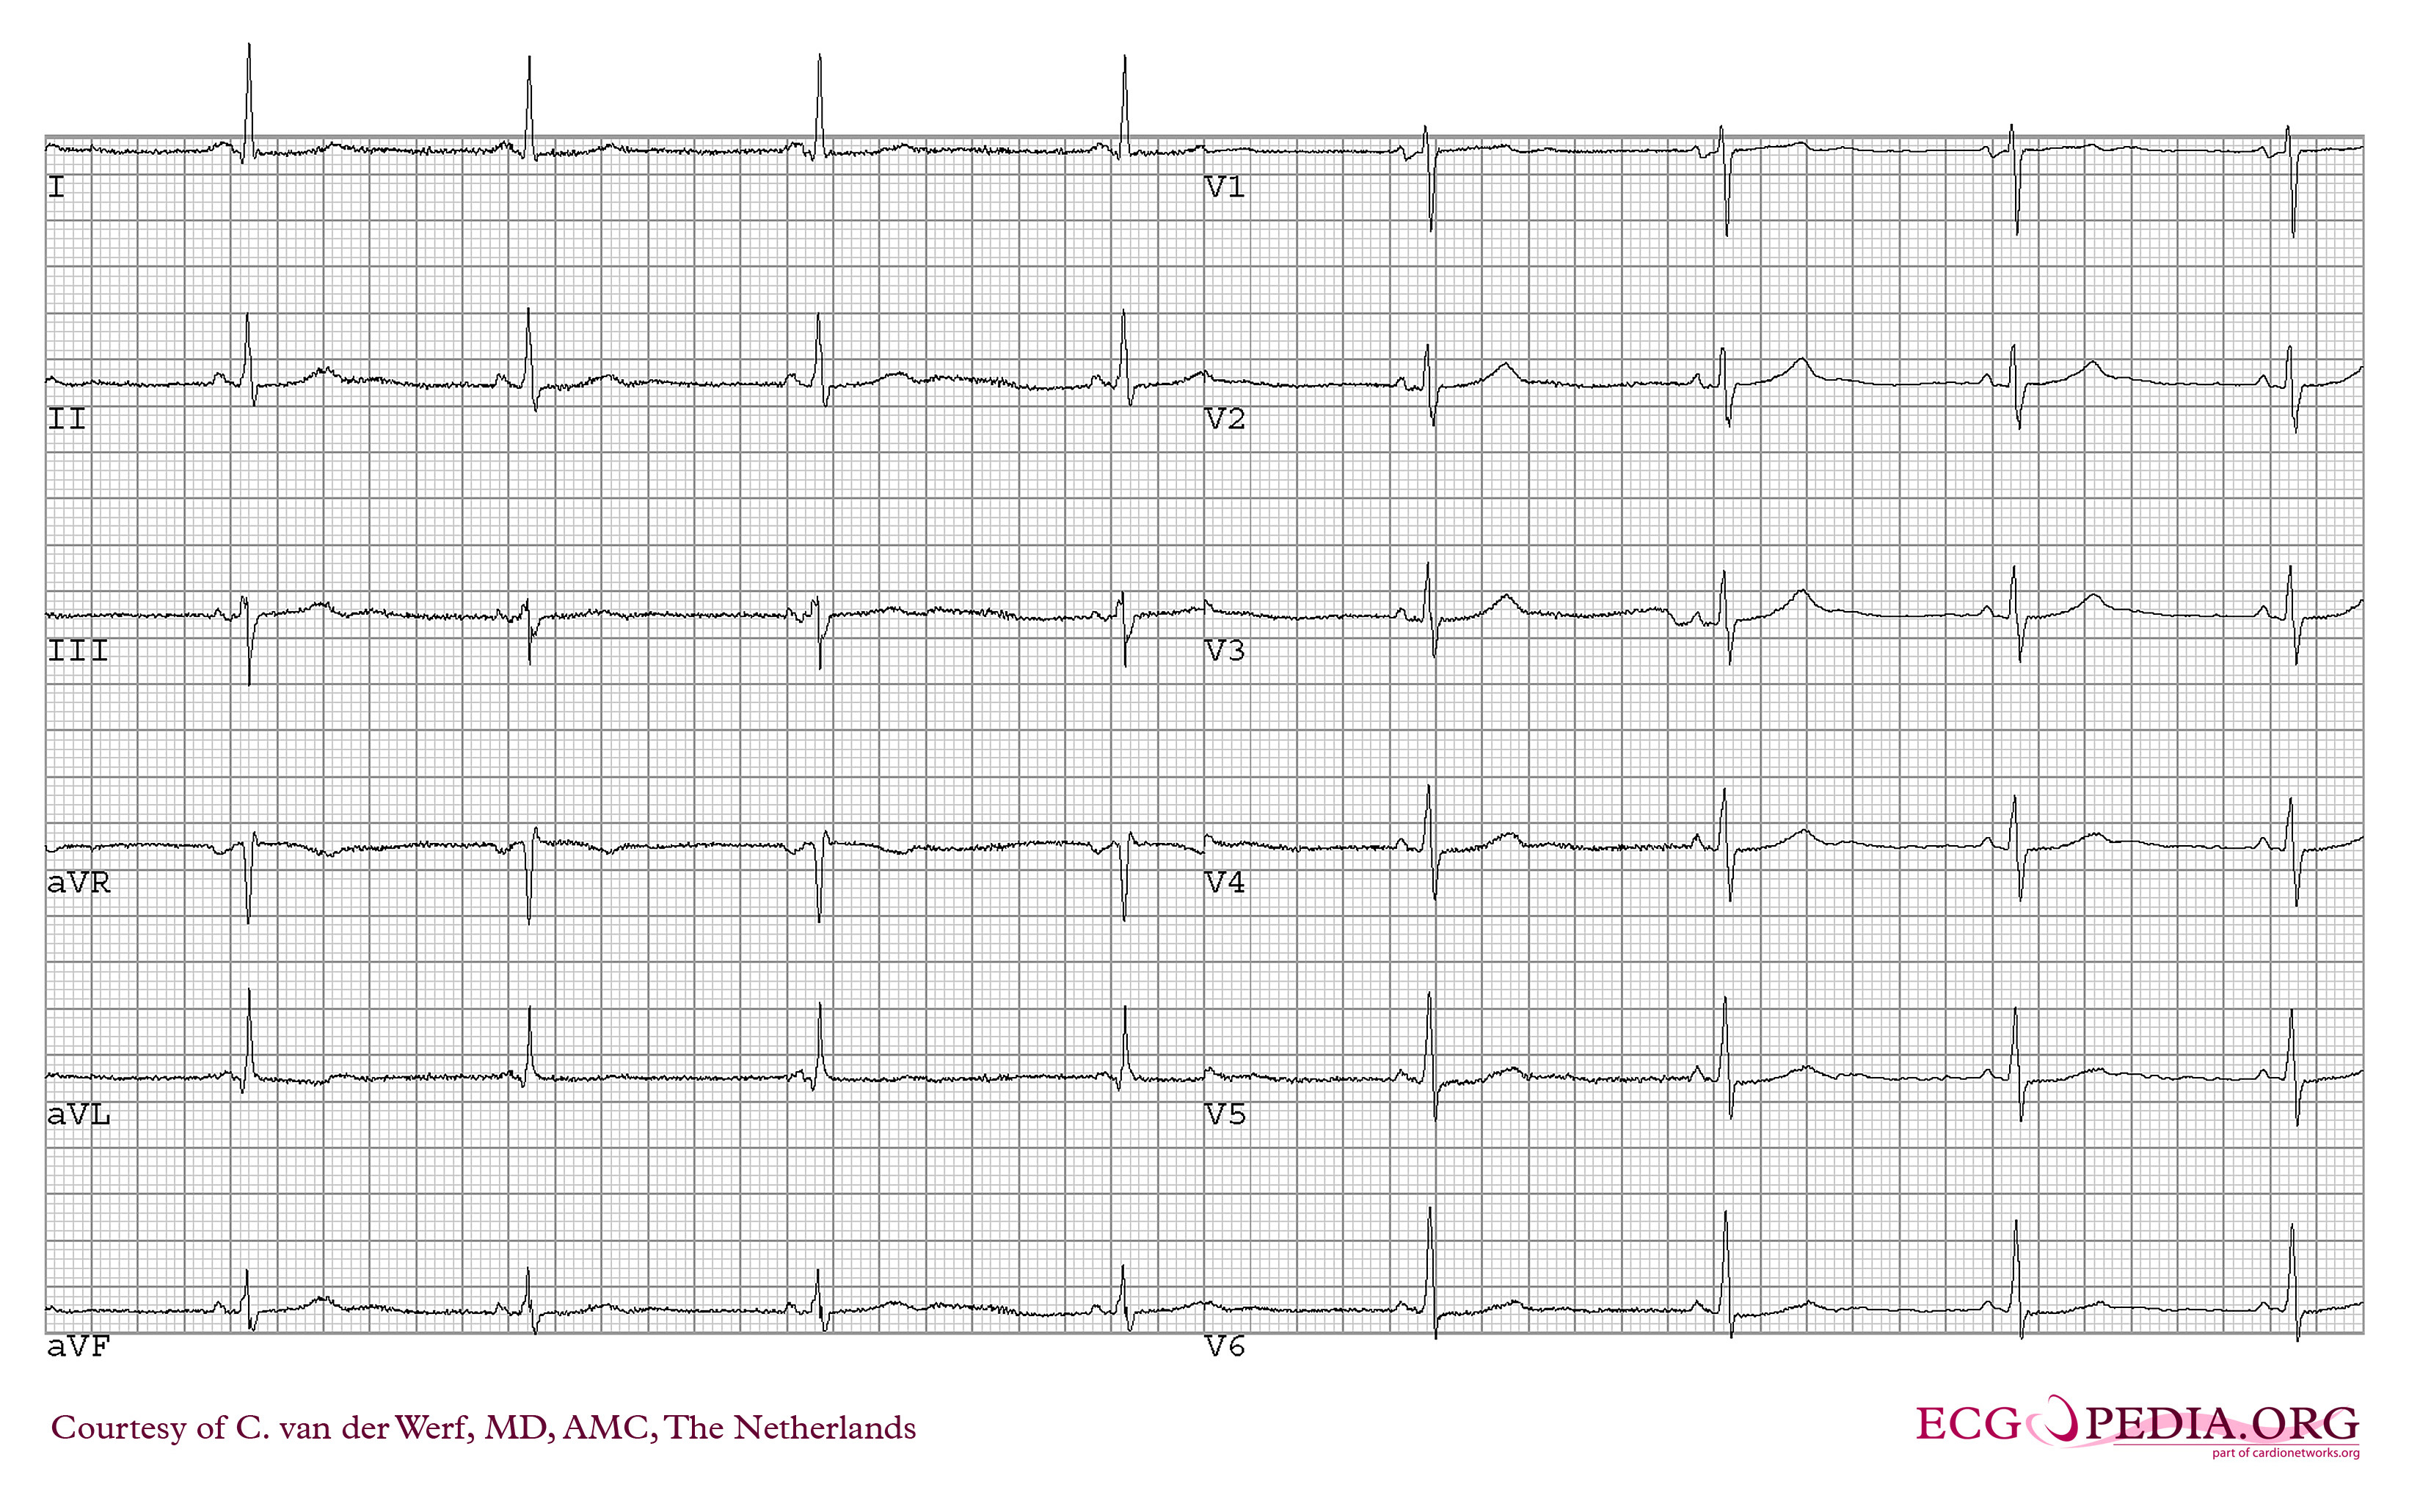 The ECG of the same patient with CPVT during exercise. Asterisks mark polymorphic ventricular beats.